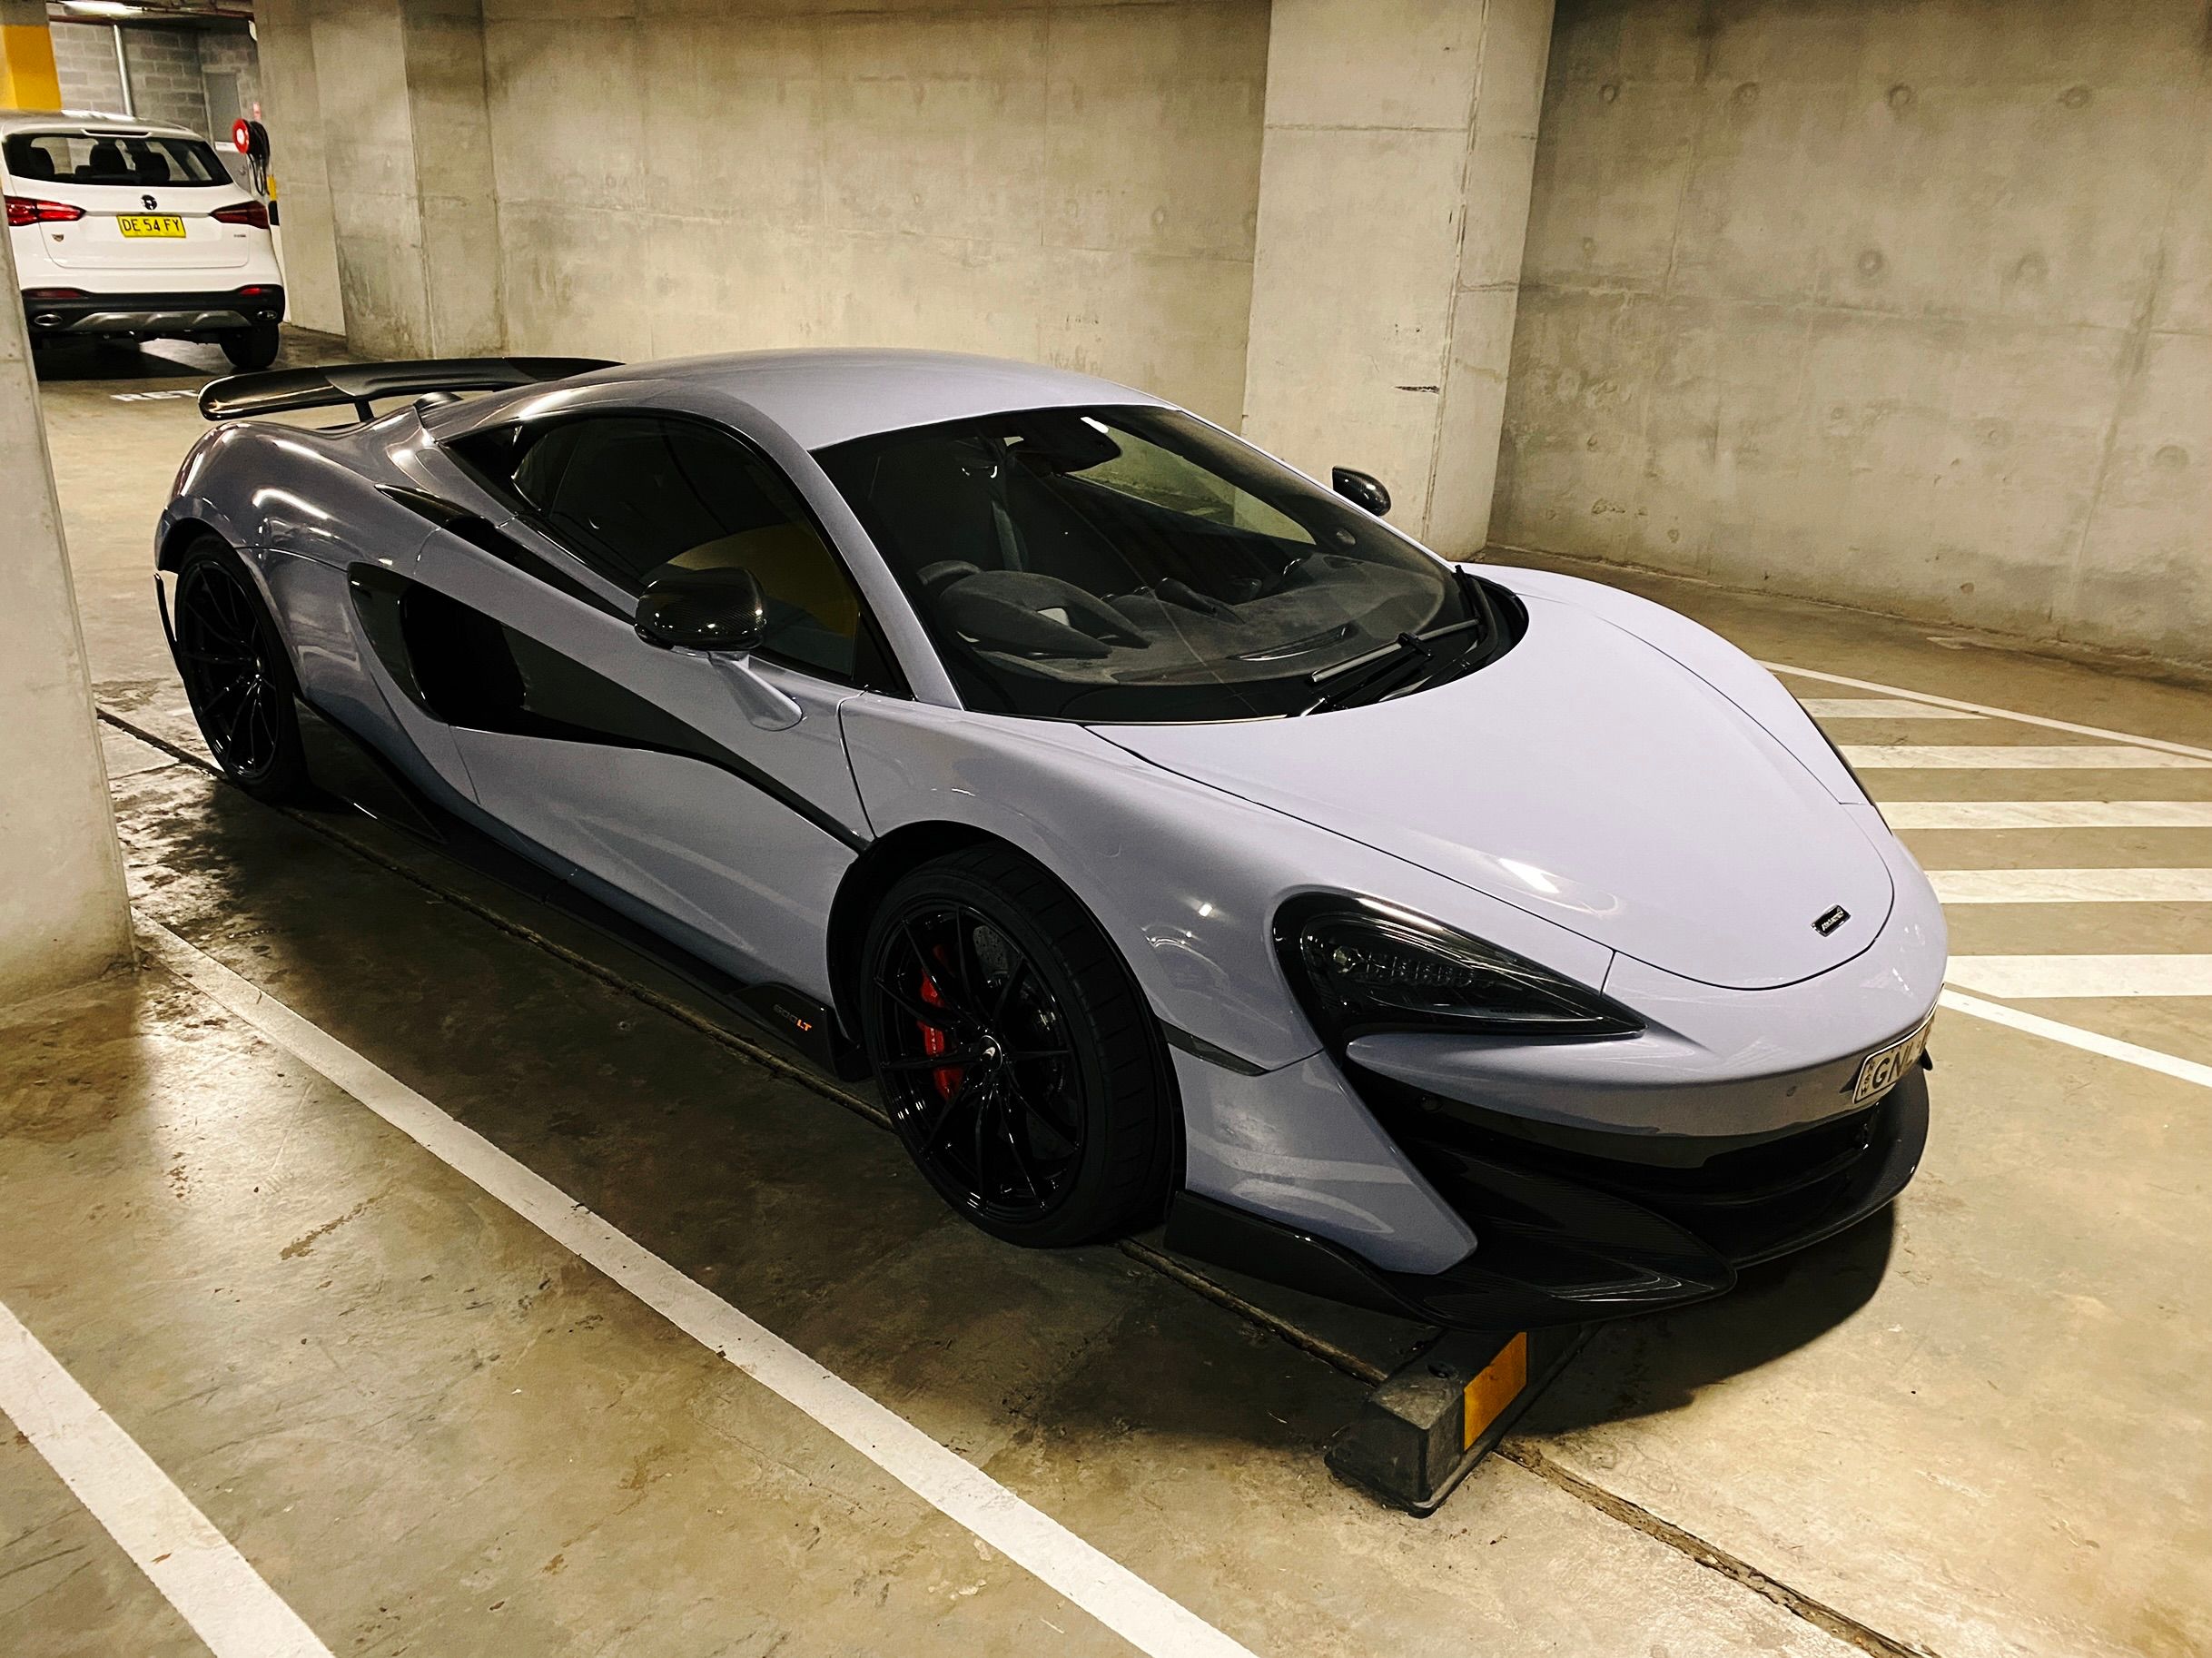 A photo of a pale bluey/purpley McLaren supercar parked in a normal-looking concrete underground carpark. It's very low and wide, and is extremely aerodynamic-looking.